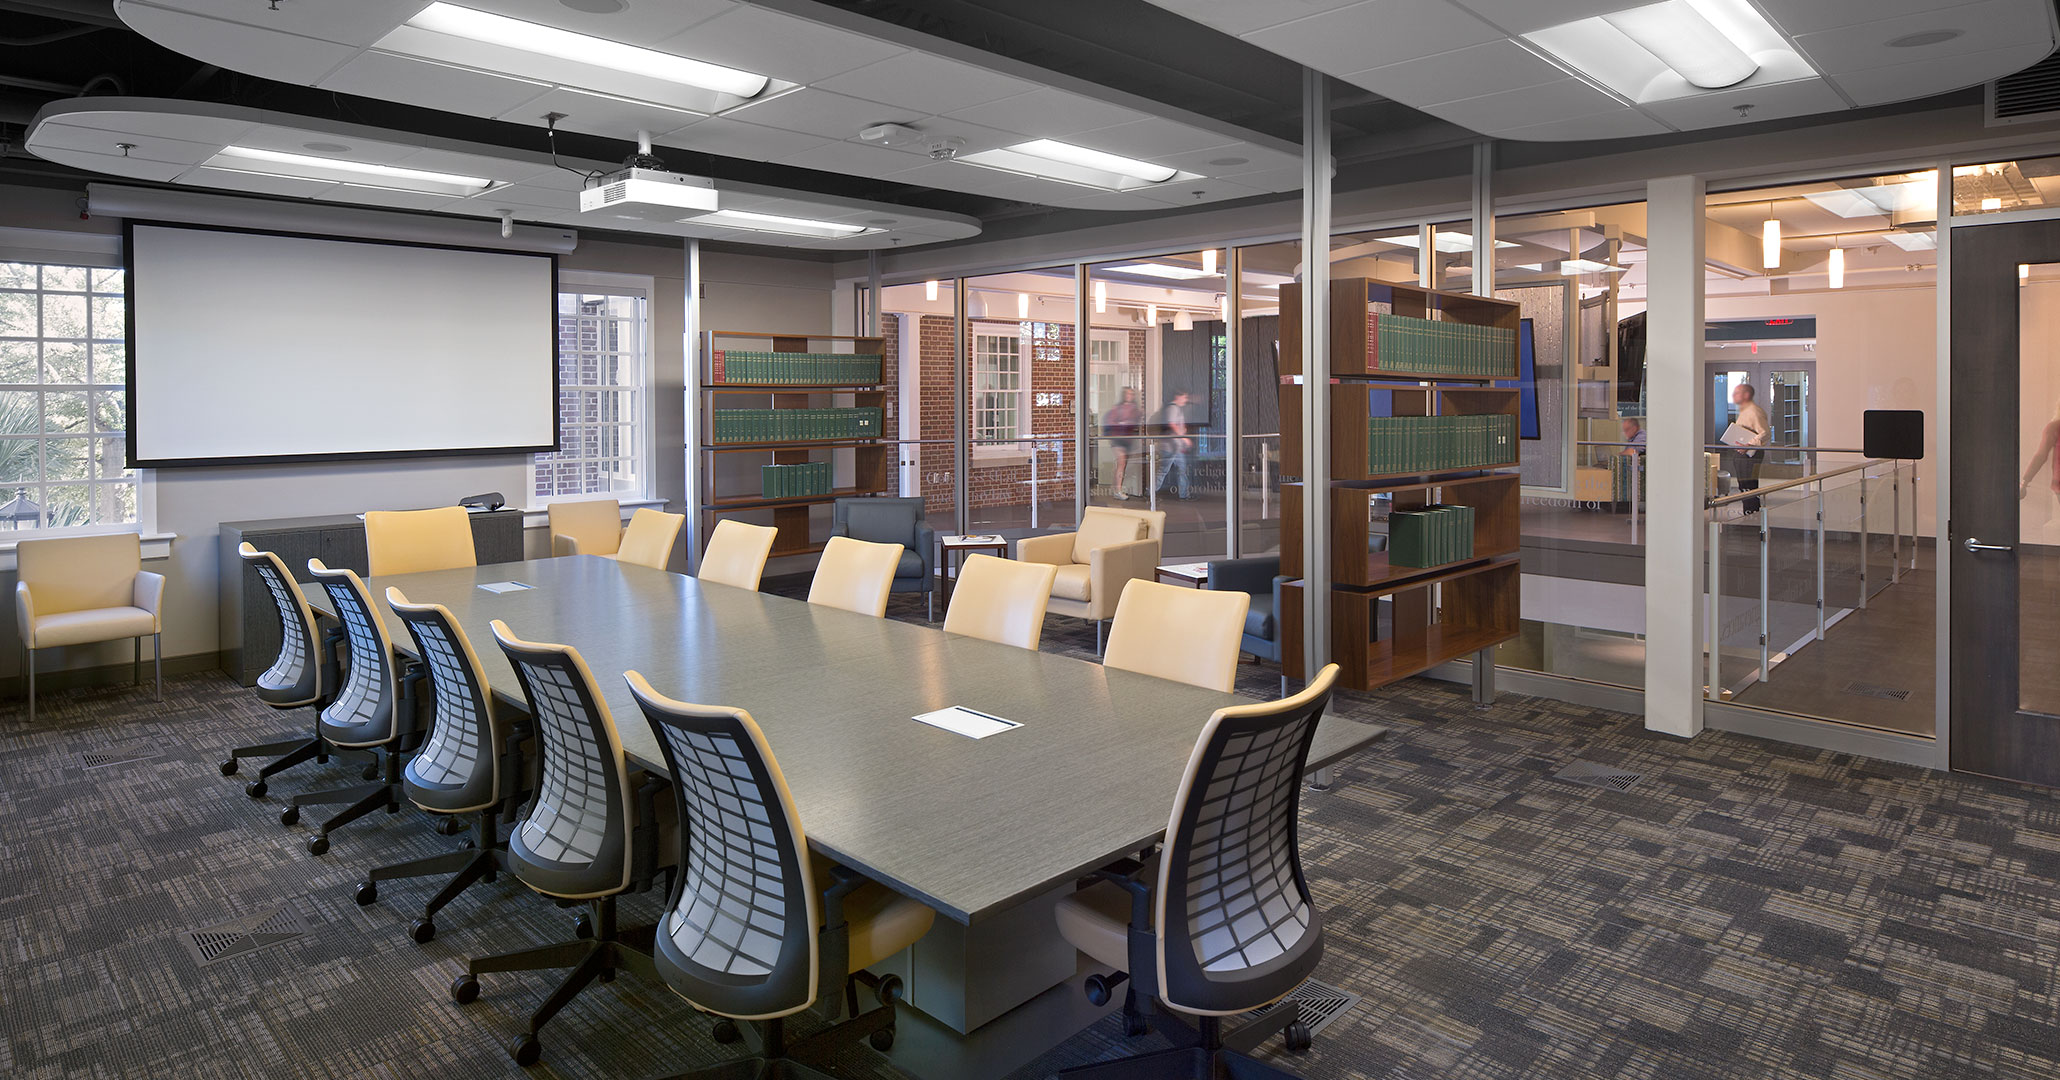 University of South Carolina hired Columbia, SC architects Boudreaux to design classrooms at the School of Journalism.